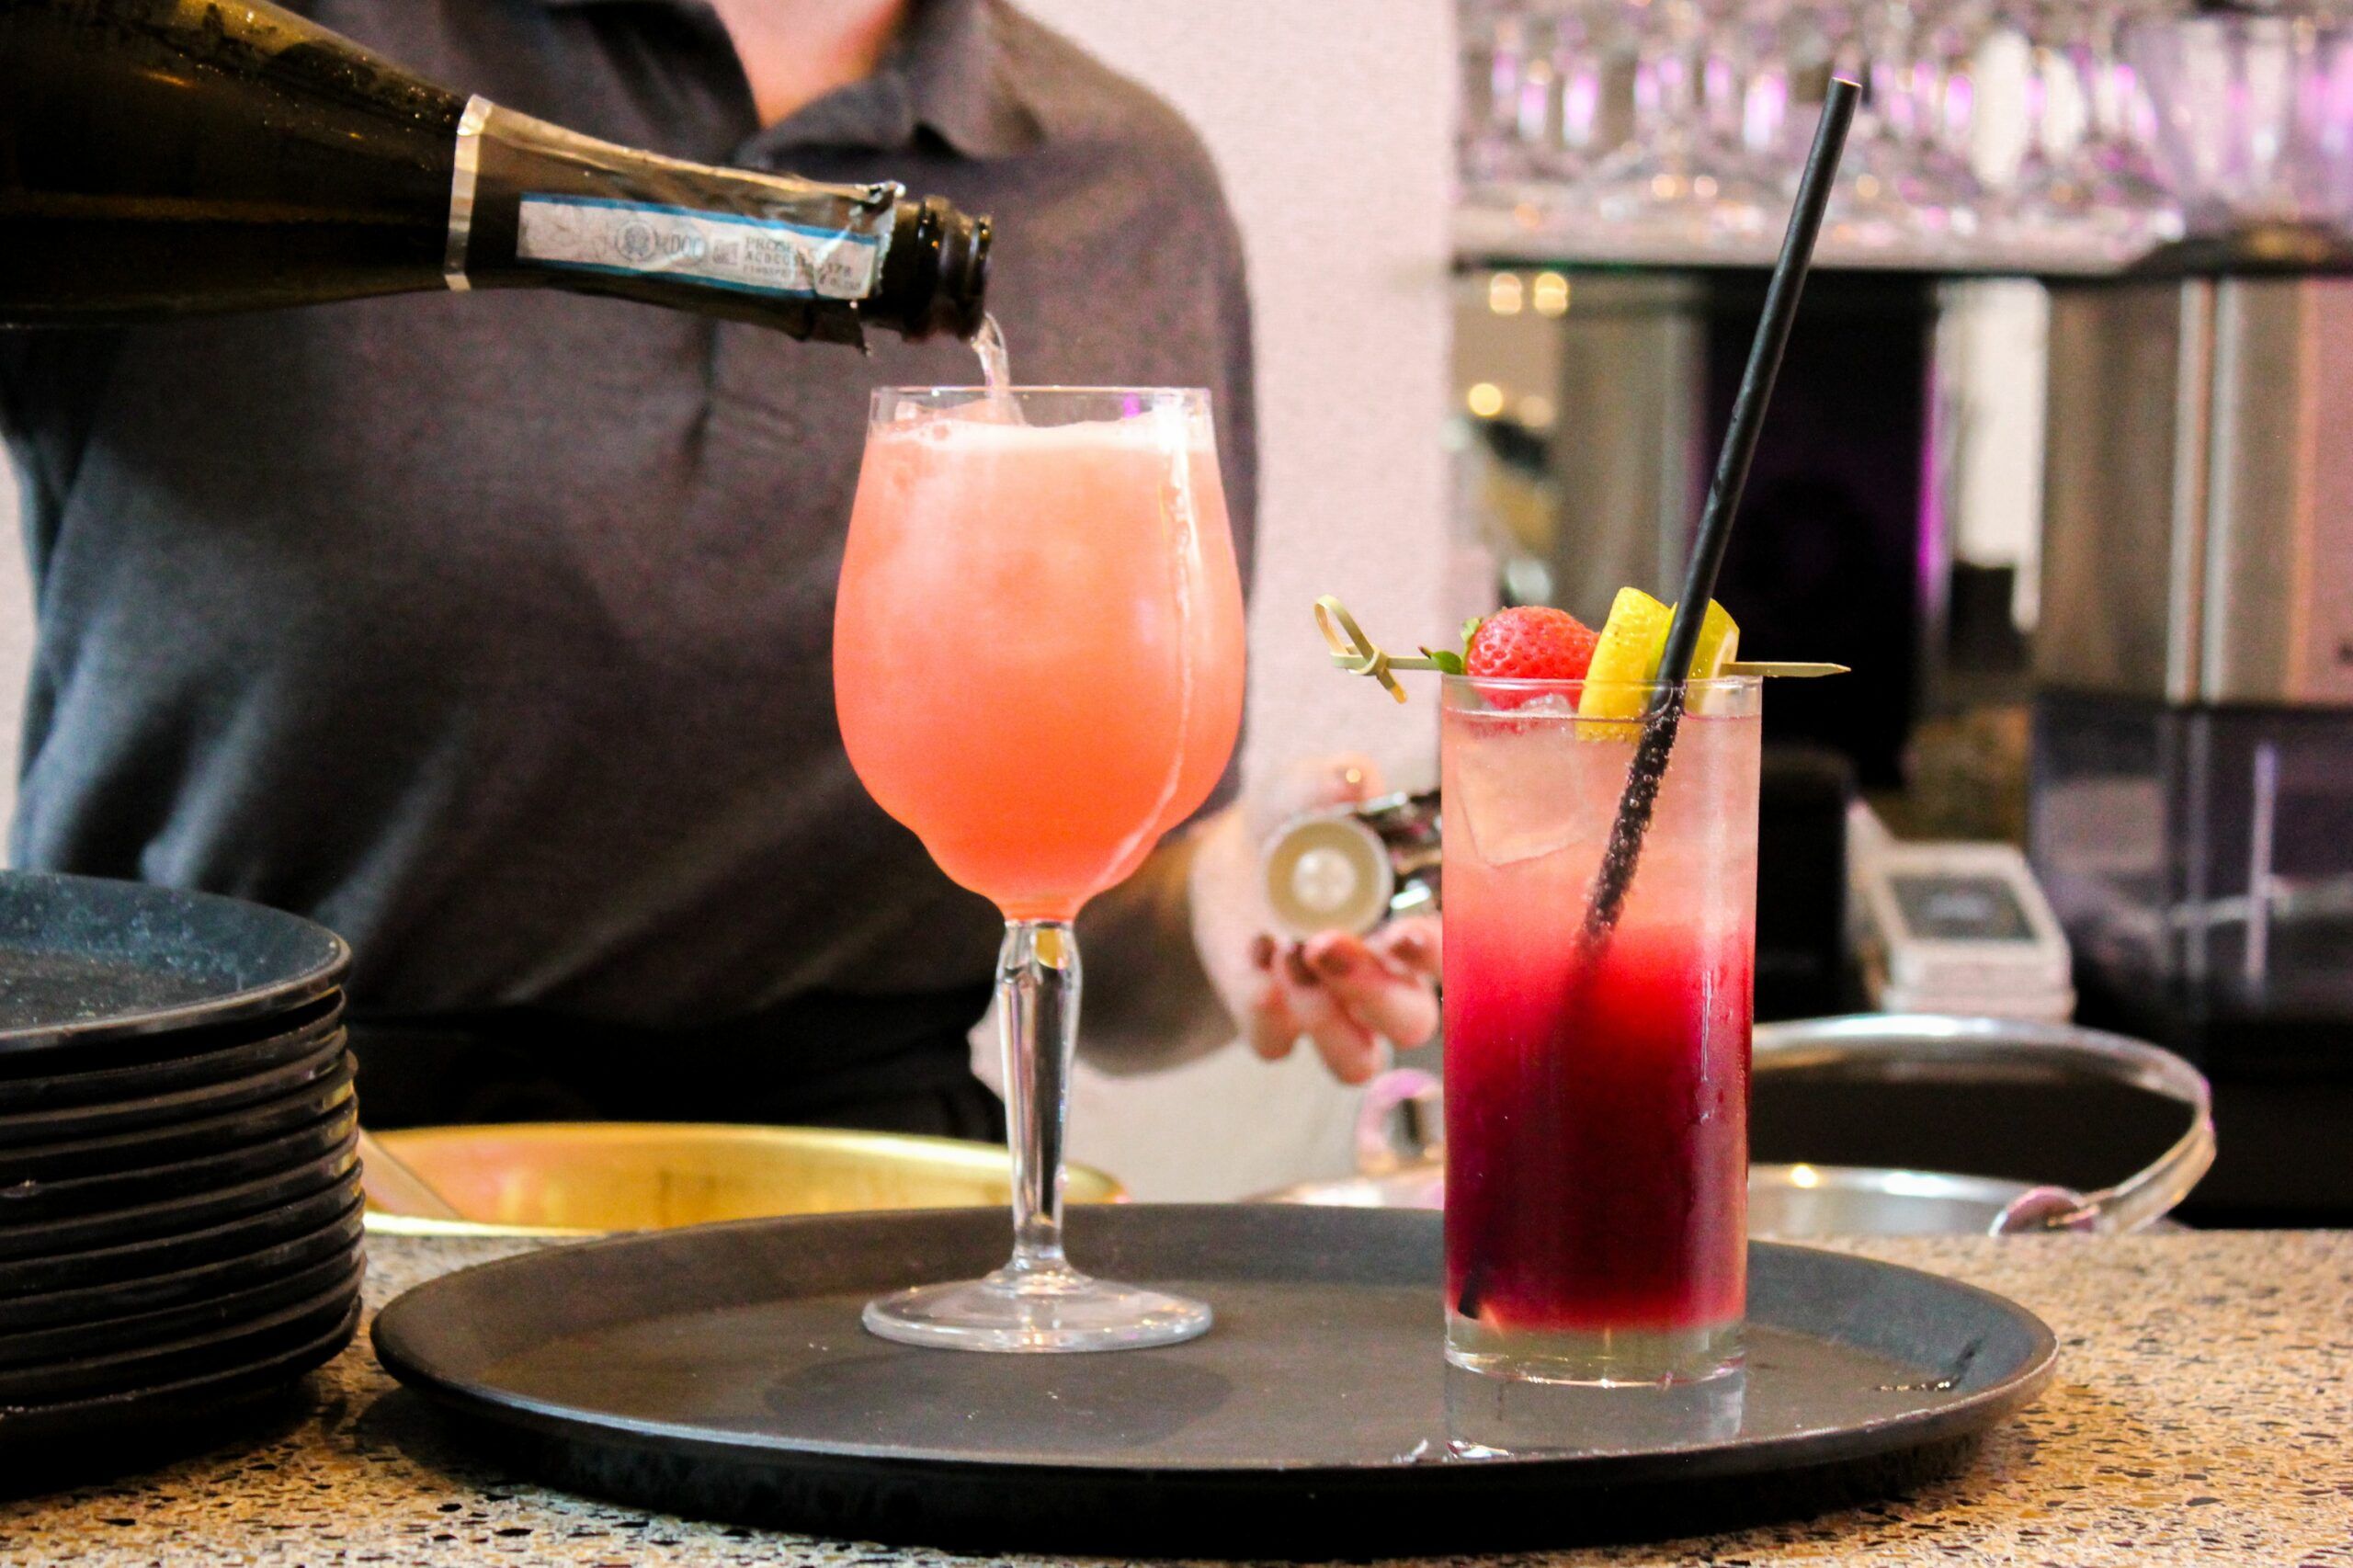 Two cocktails on a black tray, the left hand cocktail is being topped up by a server from a bottle of prosecco.